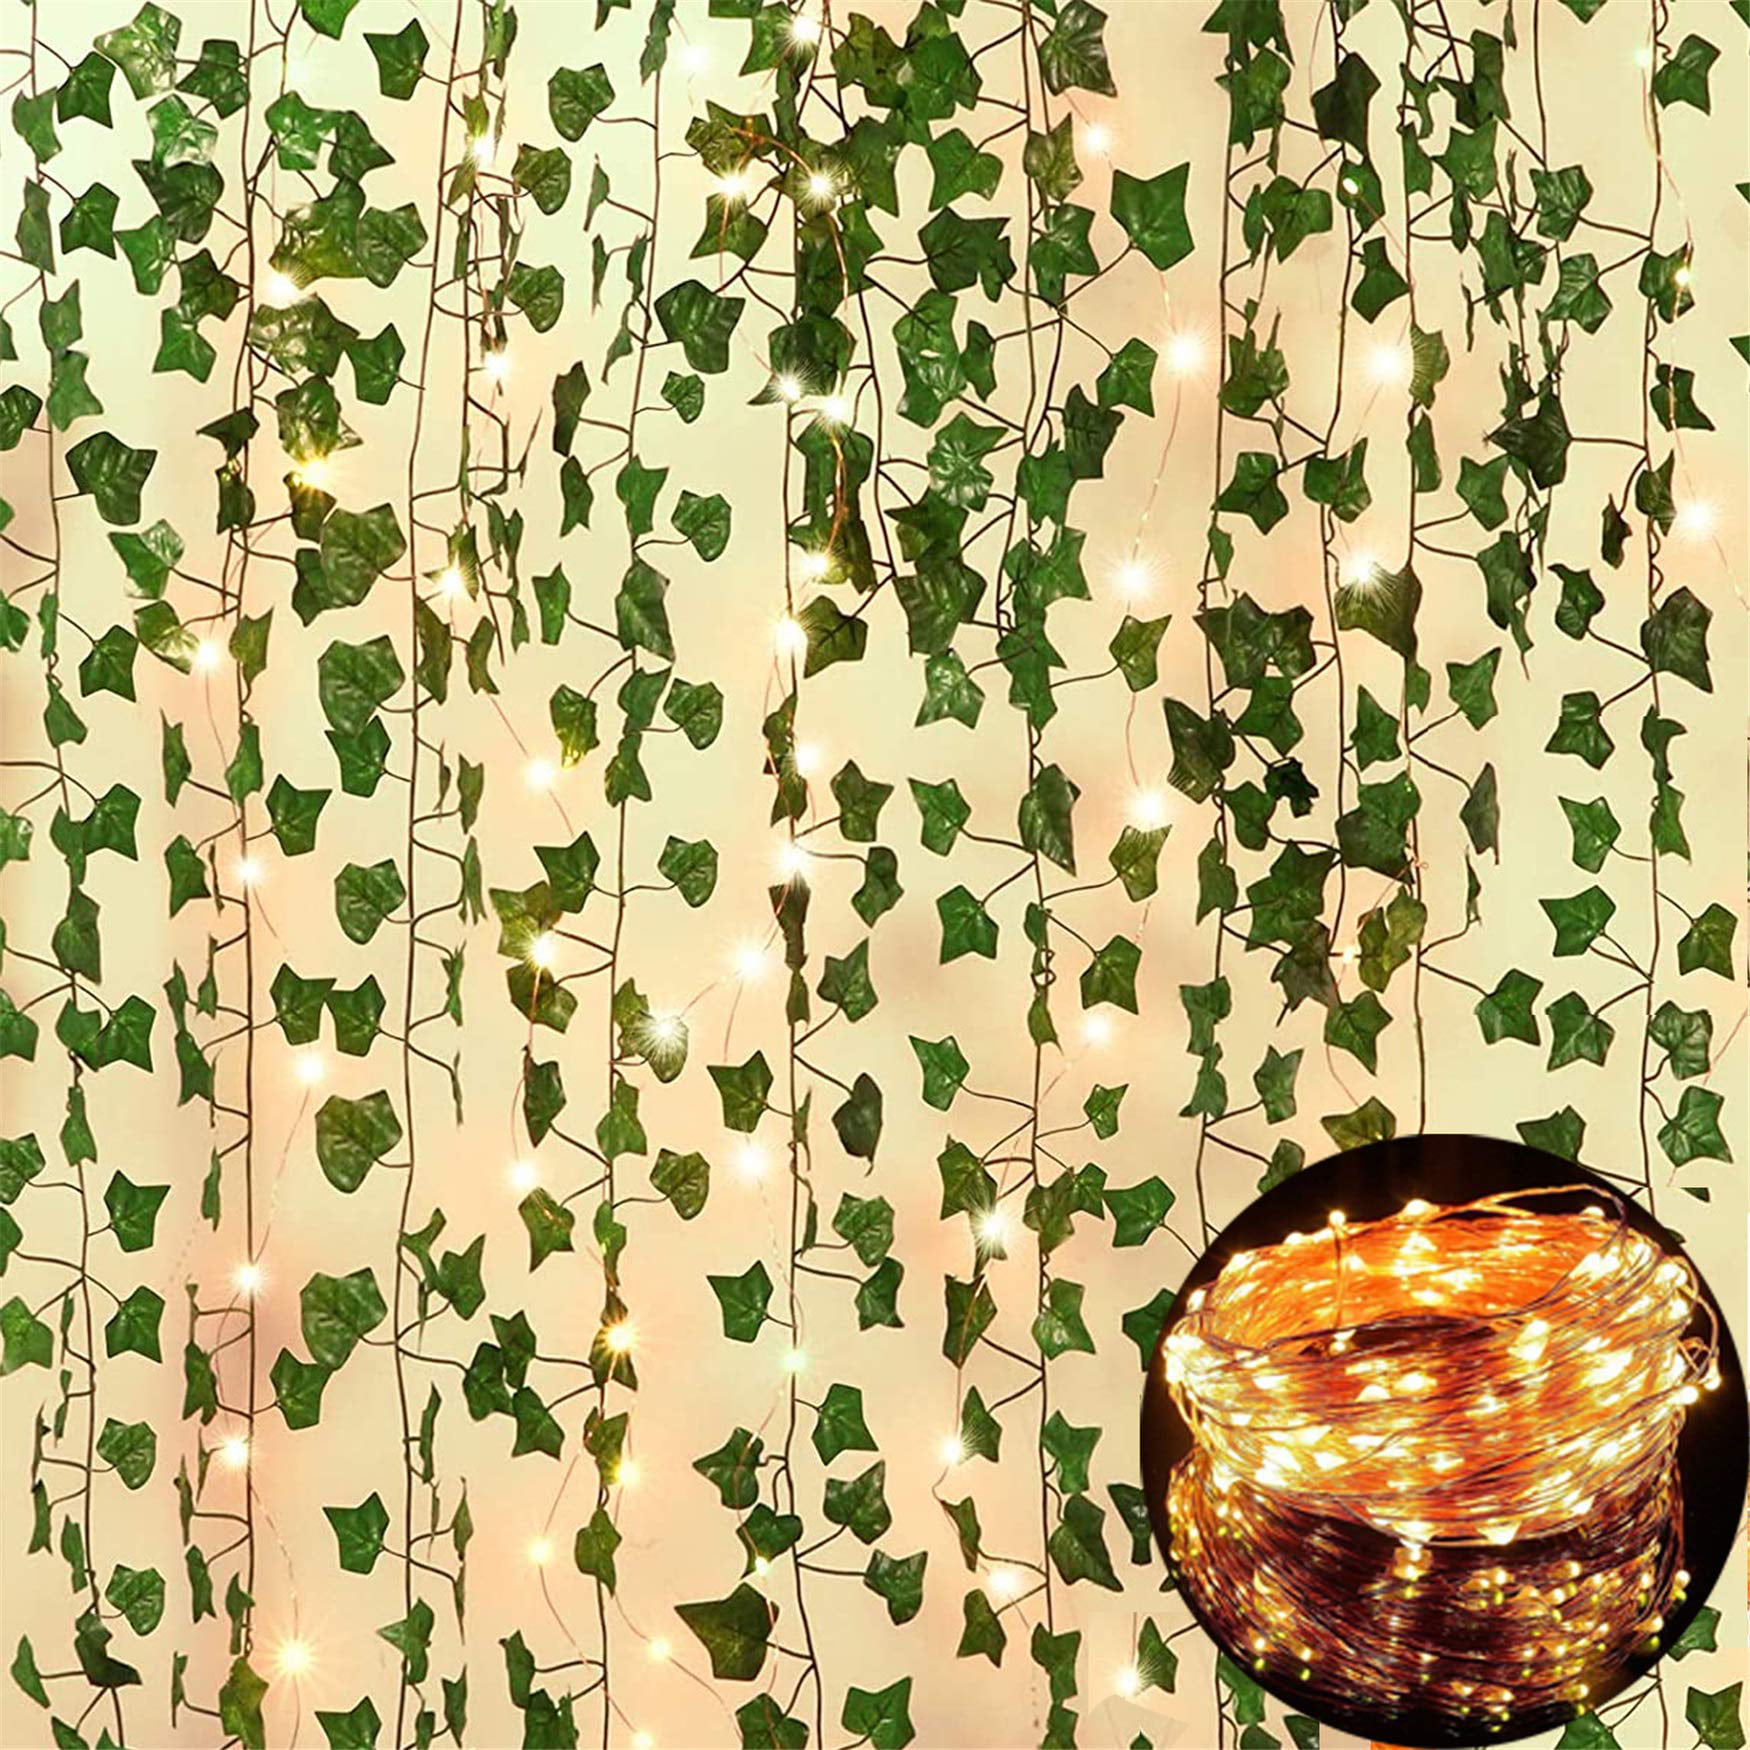 Green Hanging Plants Leaves for Room Bedroom Wedding Party Wall Decor 66ft LIZCOM 84ft 12 Pack Fake Vines Artificial Ivy Garland with 200 LED String Lights